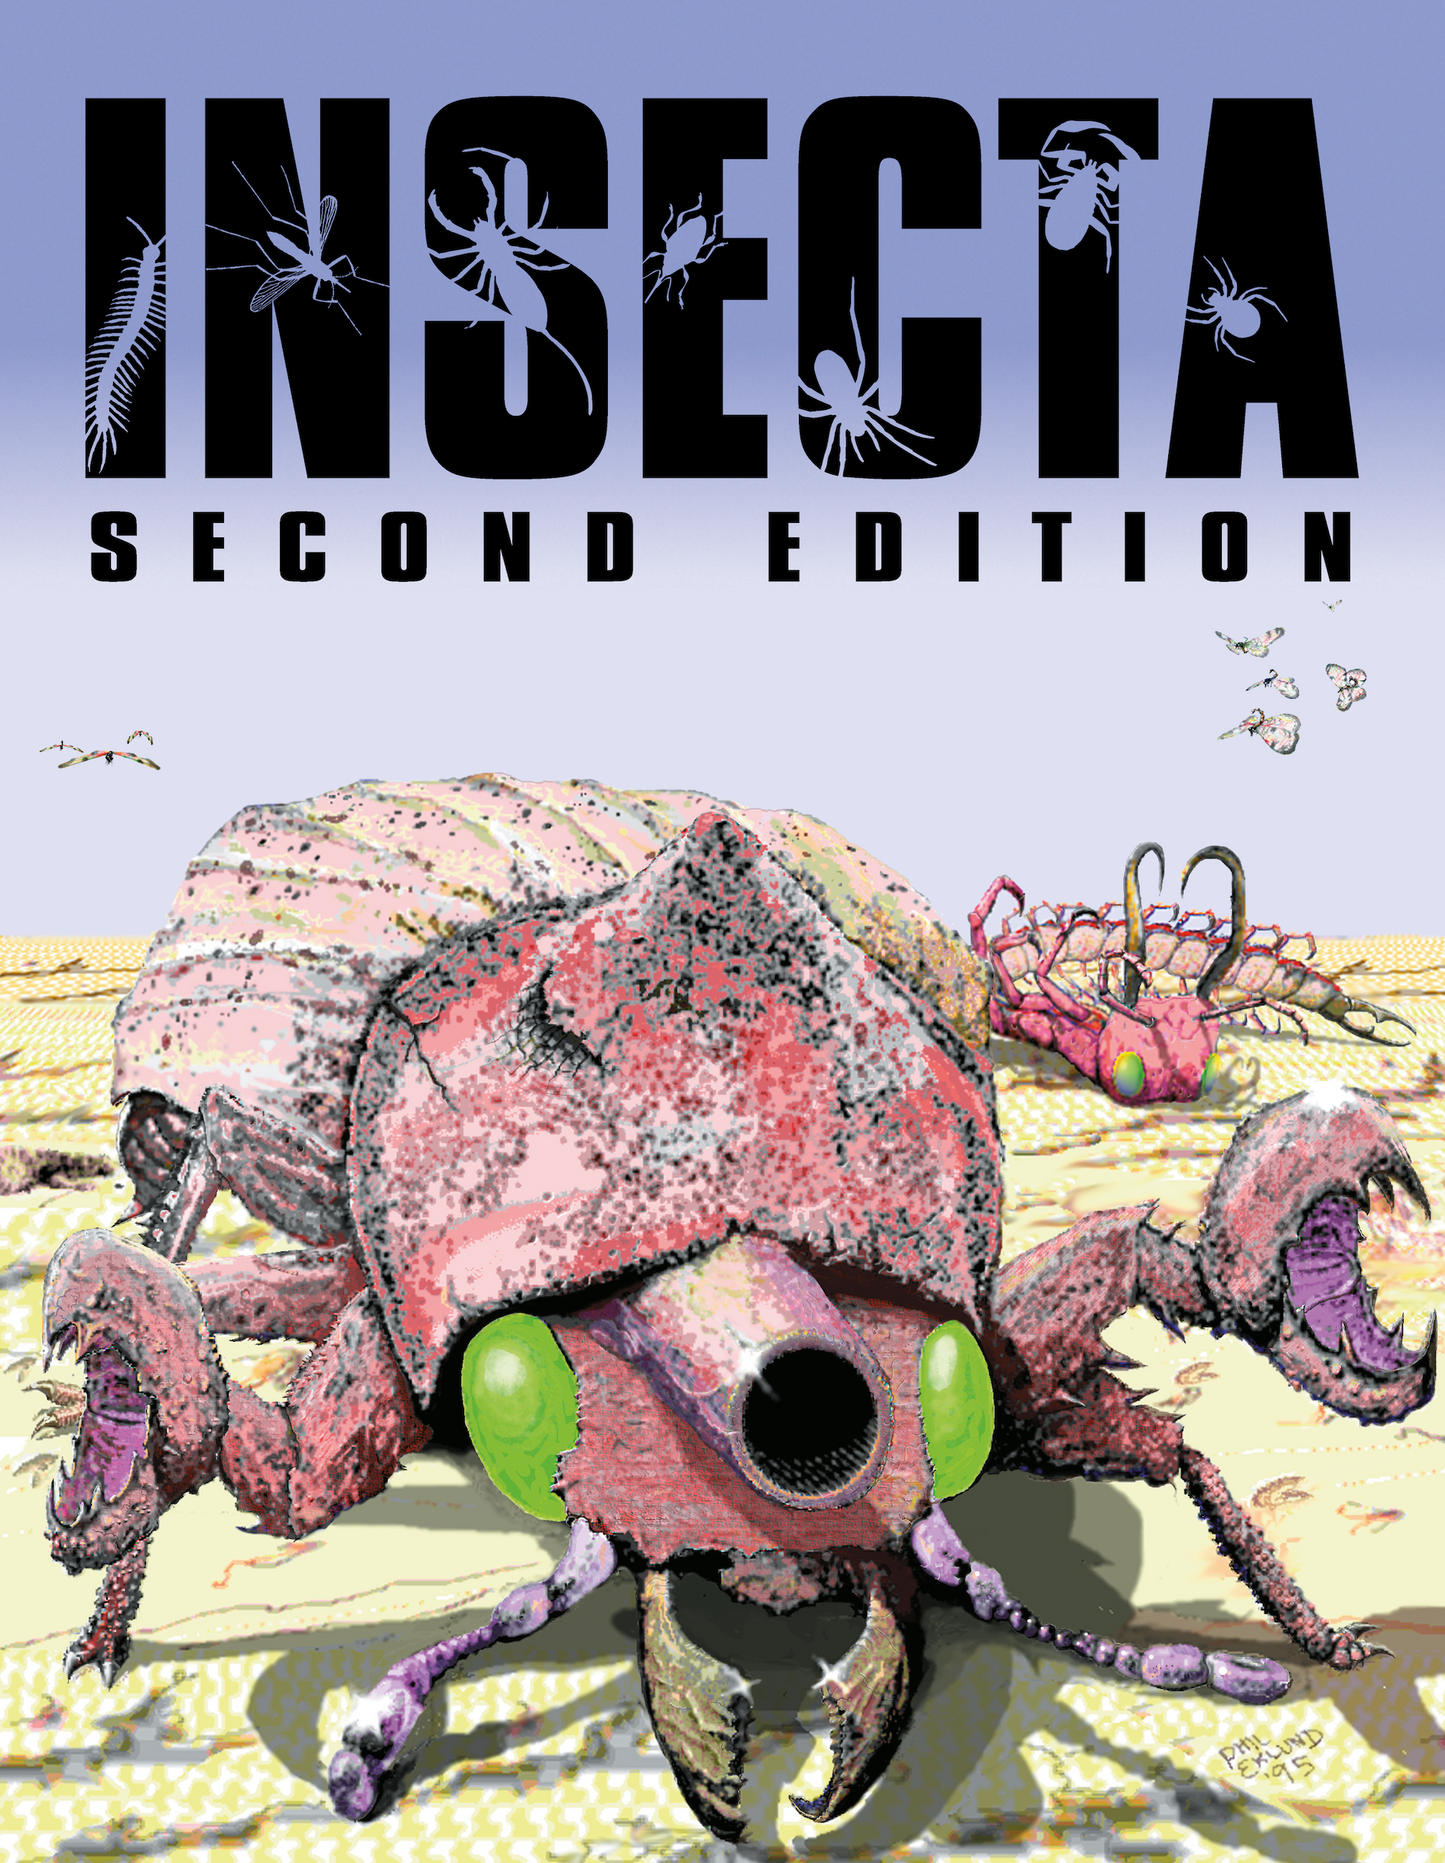 Insecta board game : Facsimile edition - front box cover